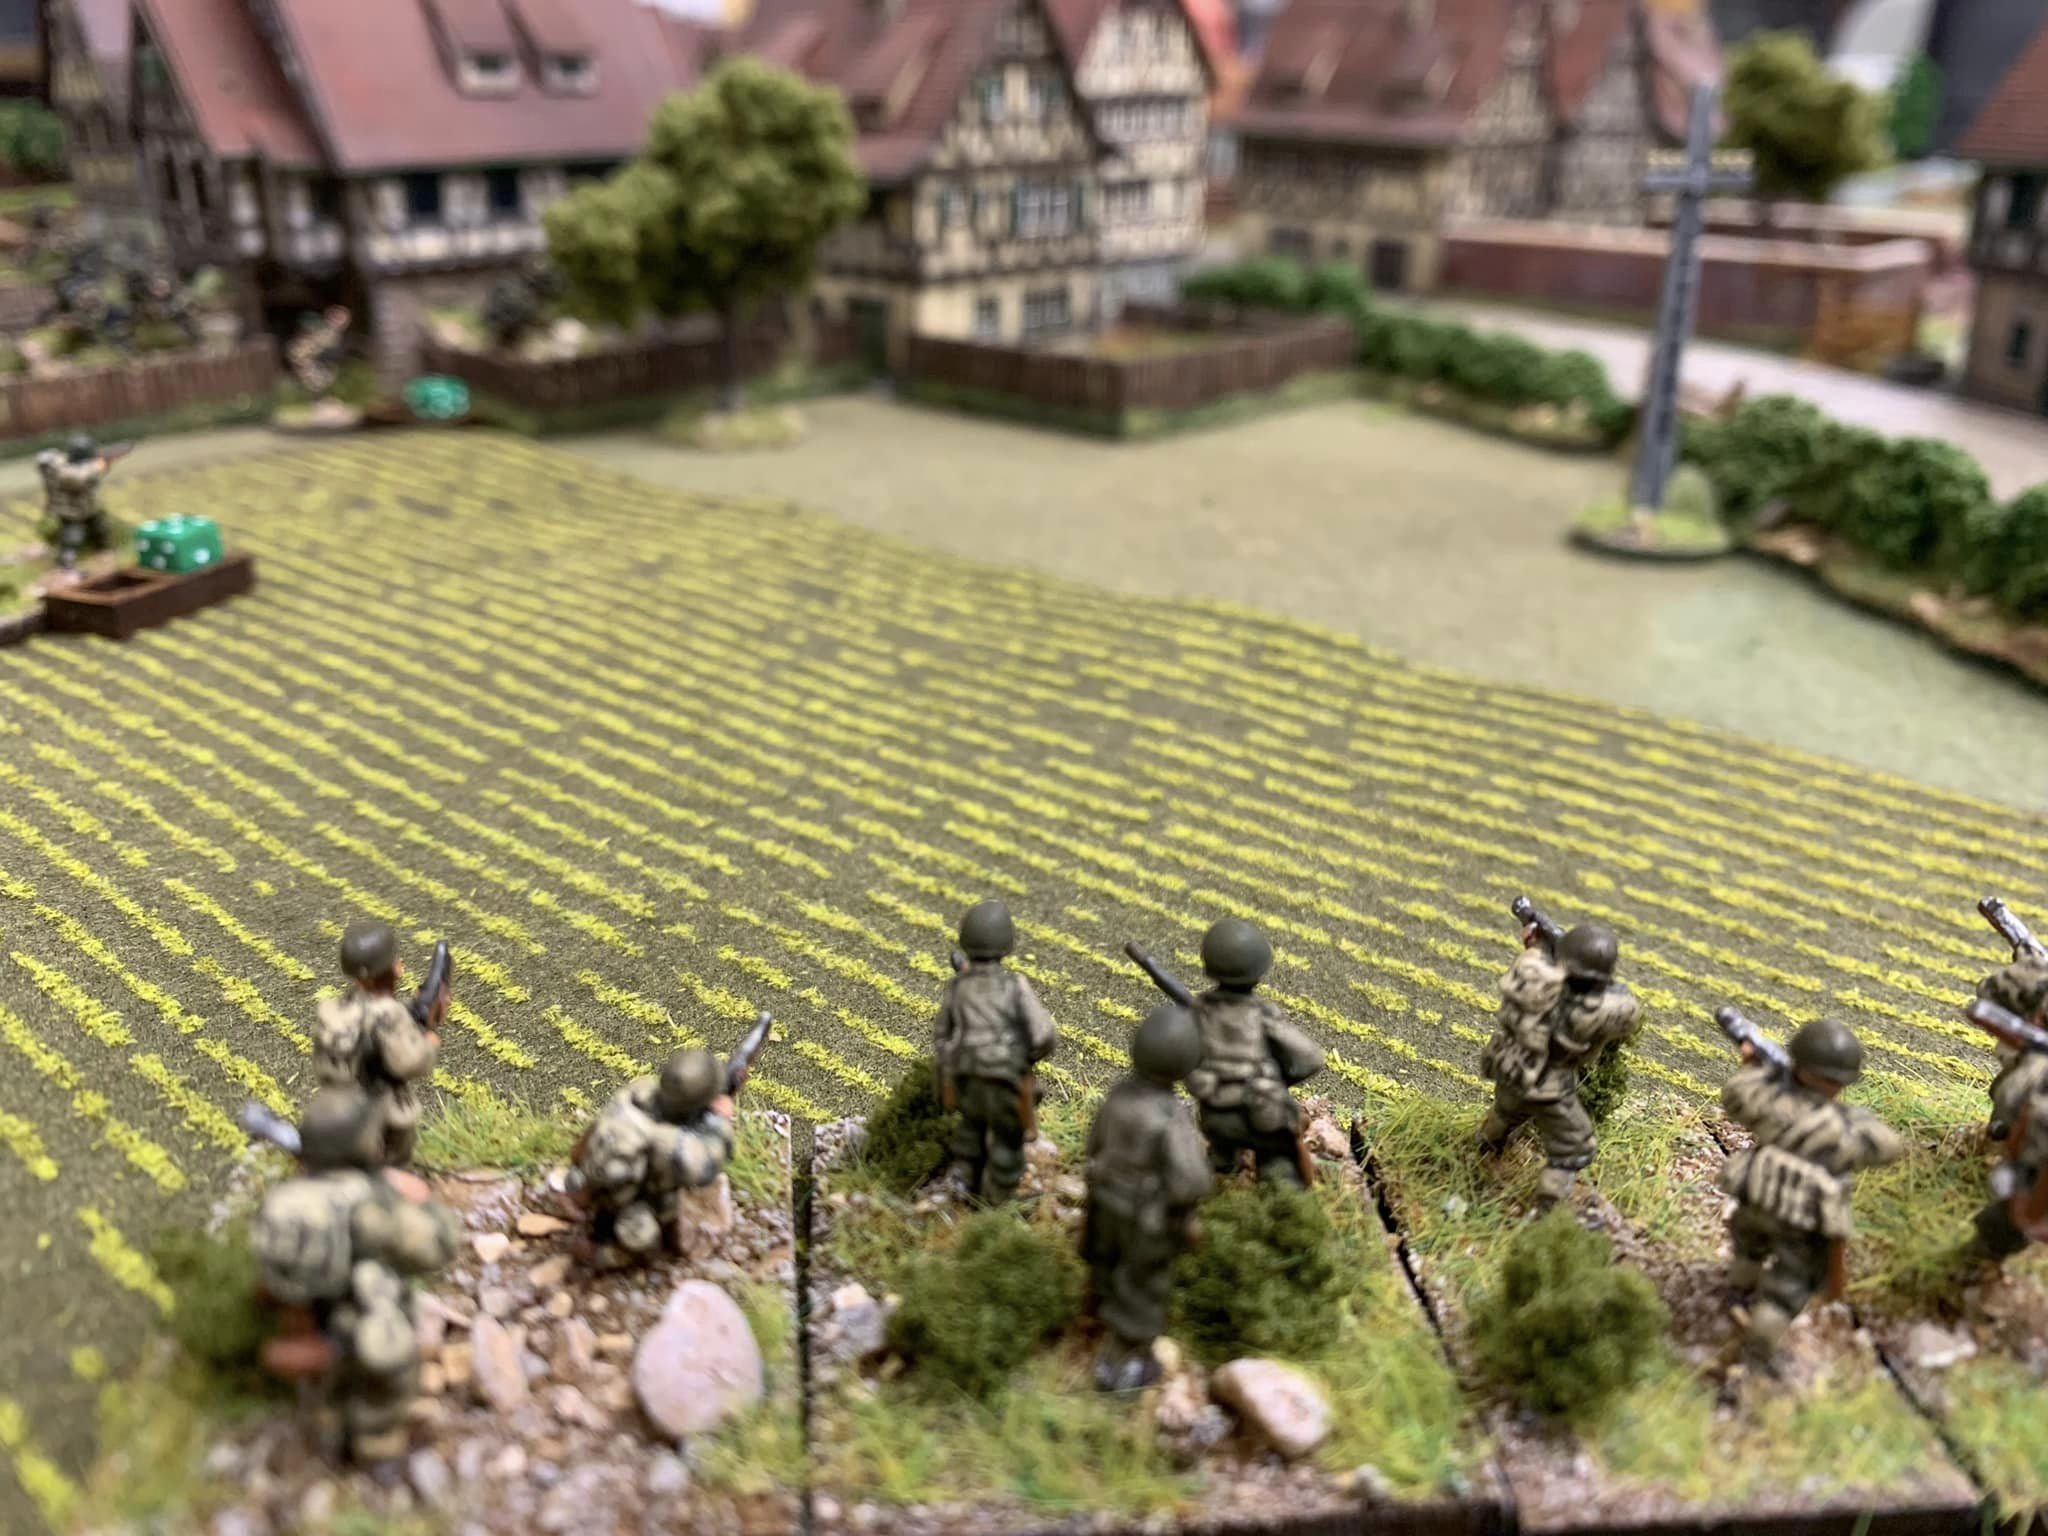 Double phase saves these infantry as they storm across the fields